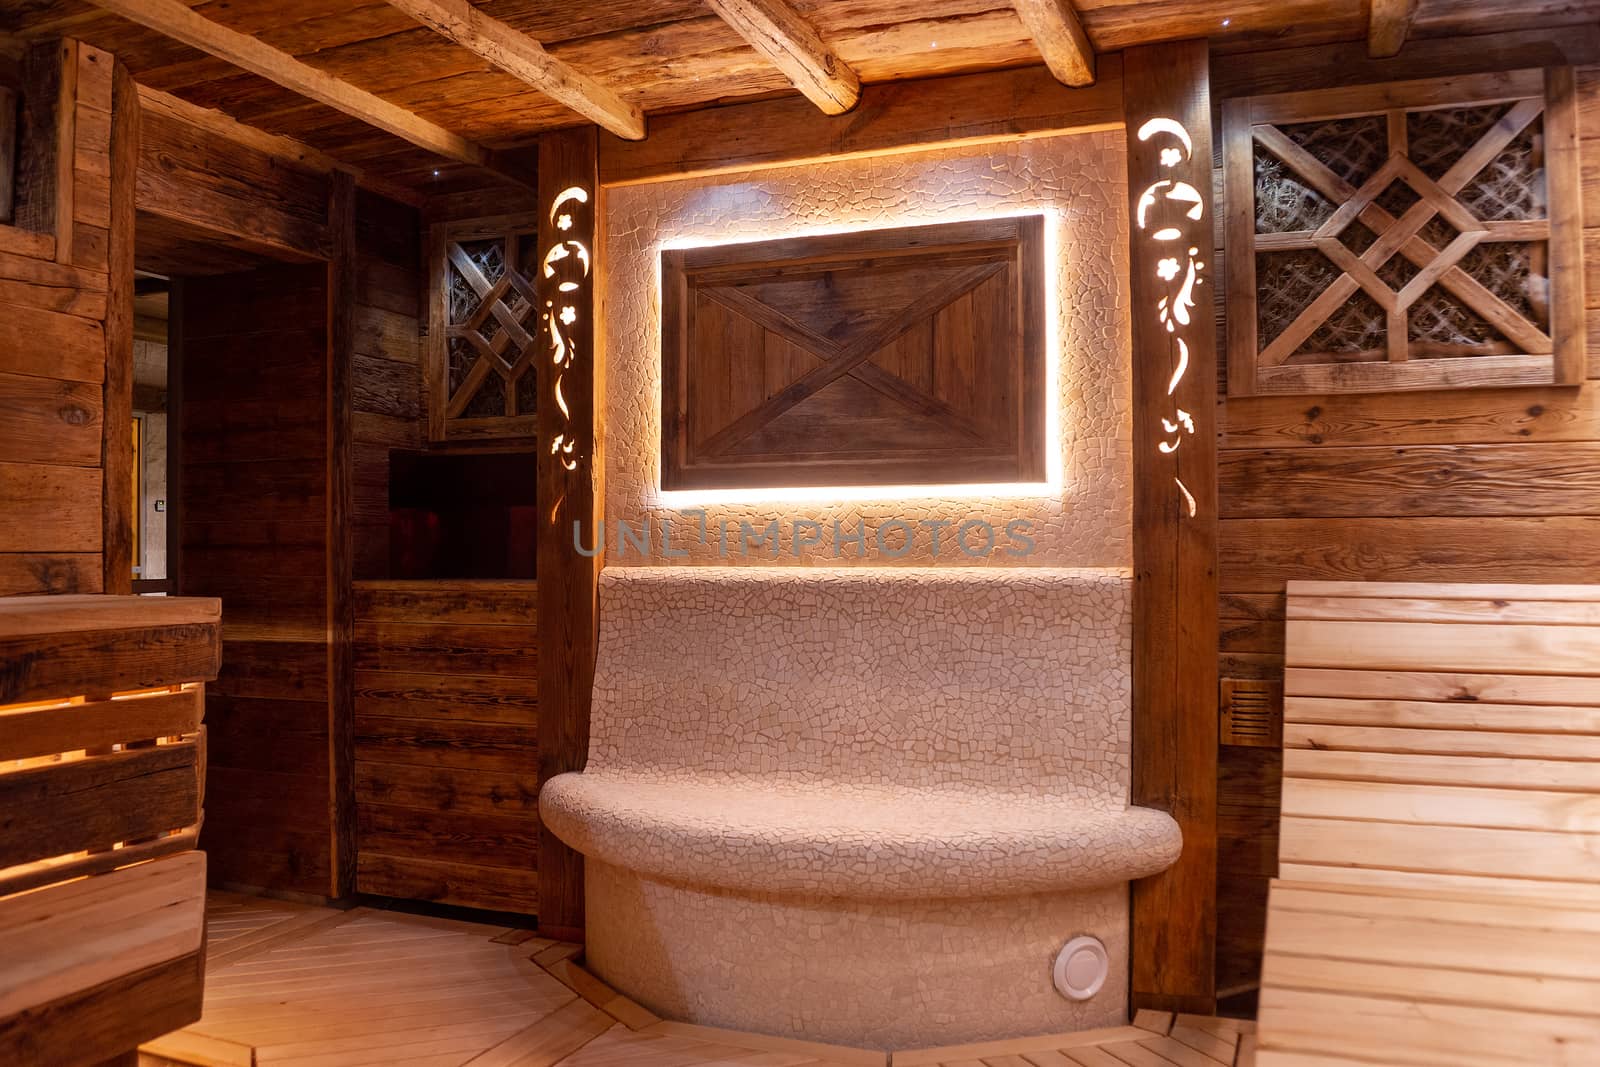 Handmade bath in the spa complex. The bath is trimmed with planks and hay.